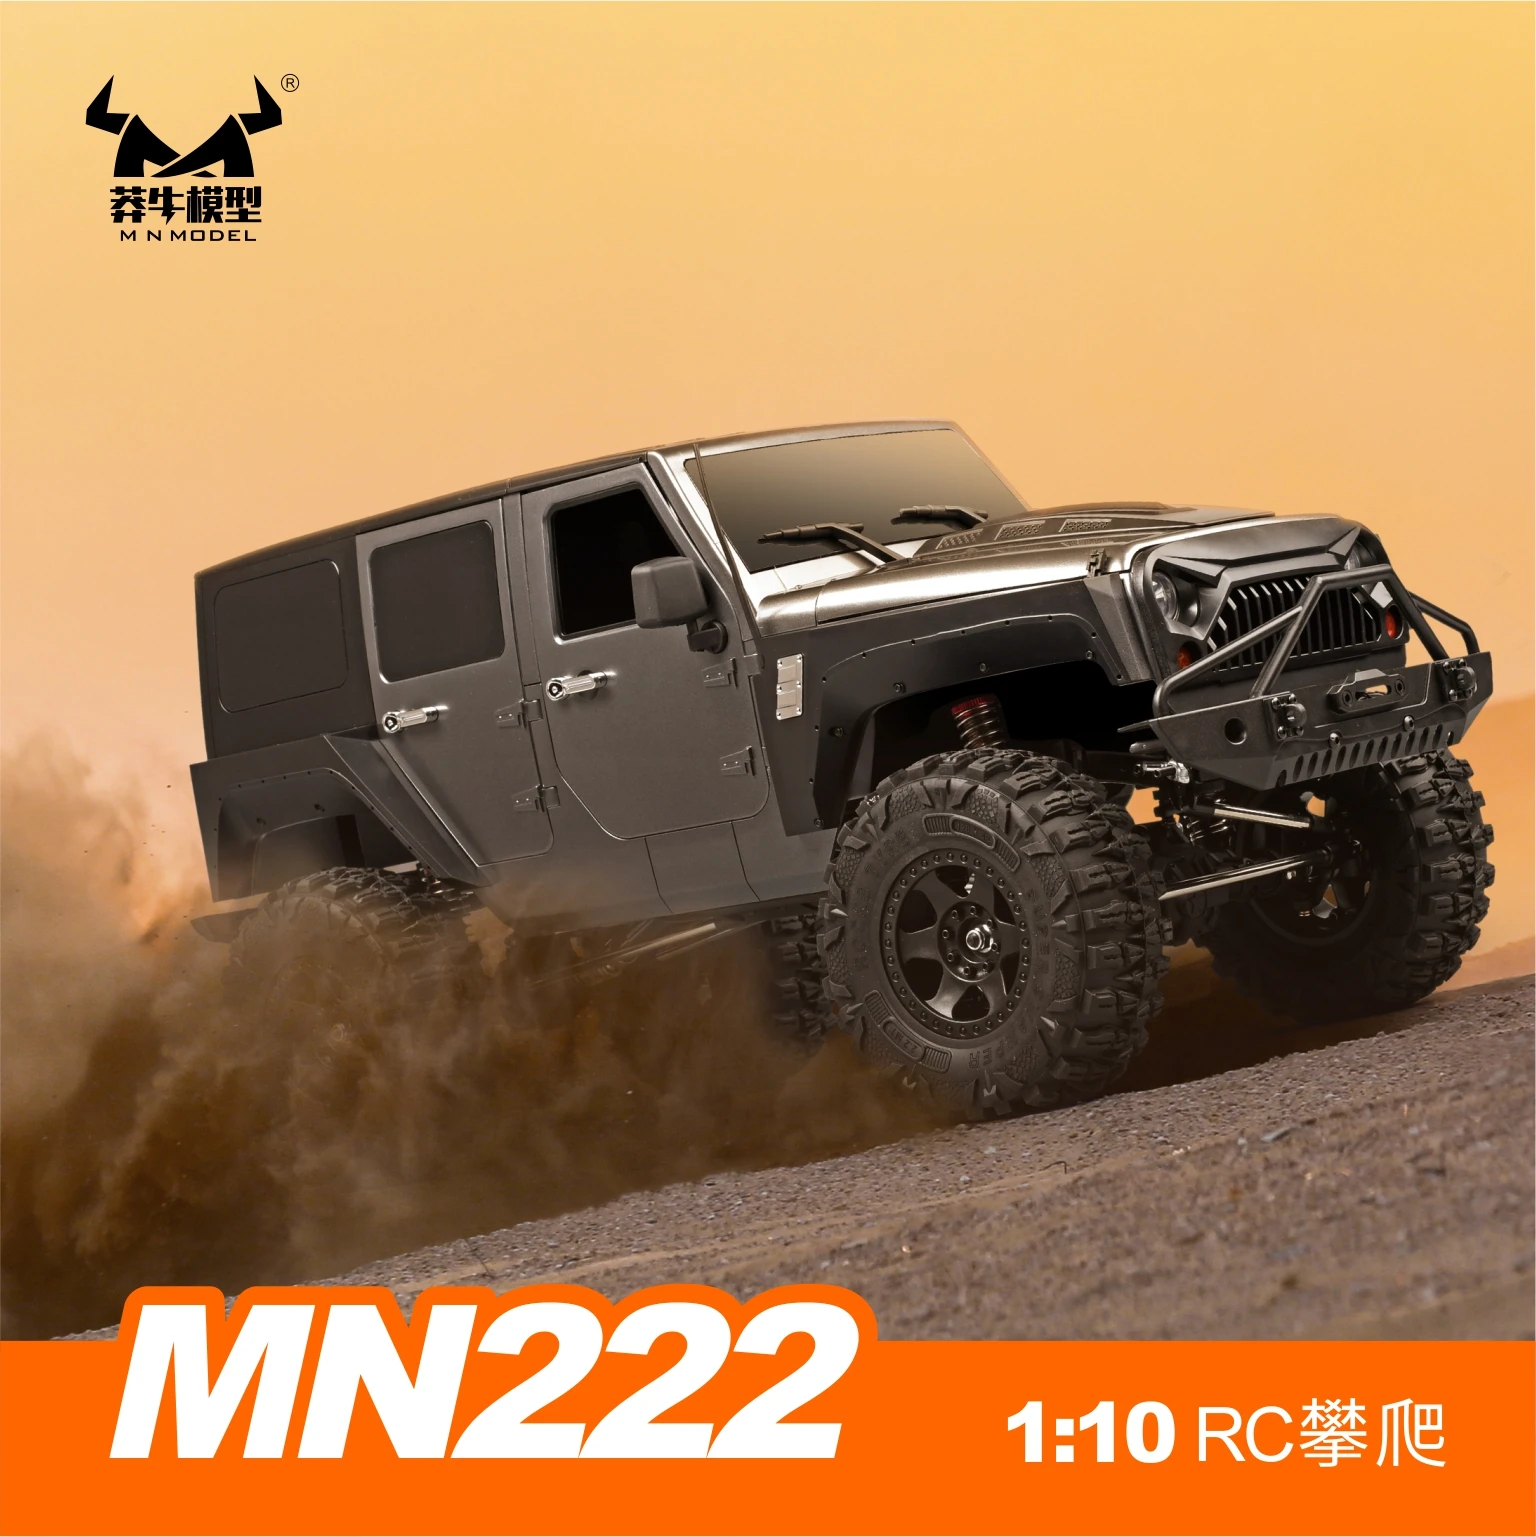 

New Remote-Controlled Car Mn-222 Full Proportion Rc Remote-Controlled Car 2.4g Four-Wheel Drive Climbing Car Model Ra Car Toy